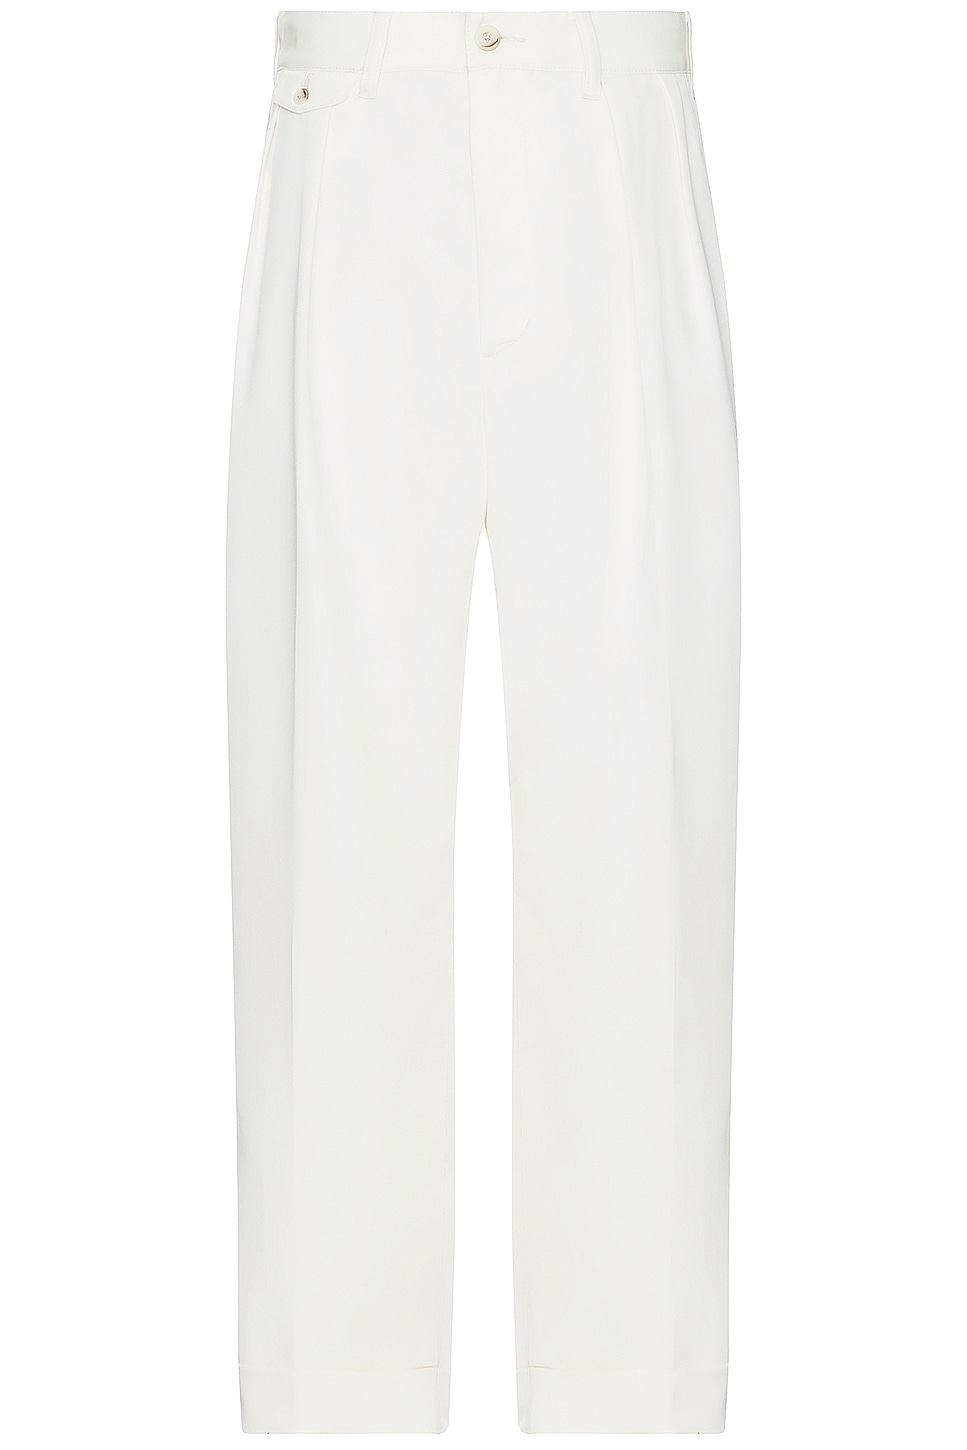 Image 1 of Beams Plus 2 Pleats Trousers Pe Twill in Oyster